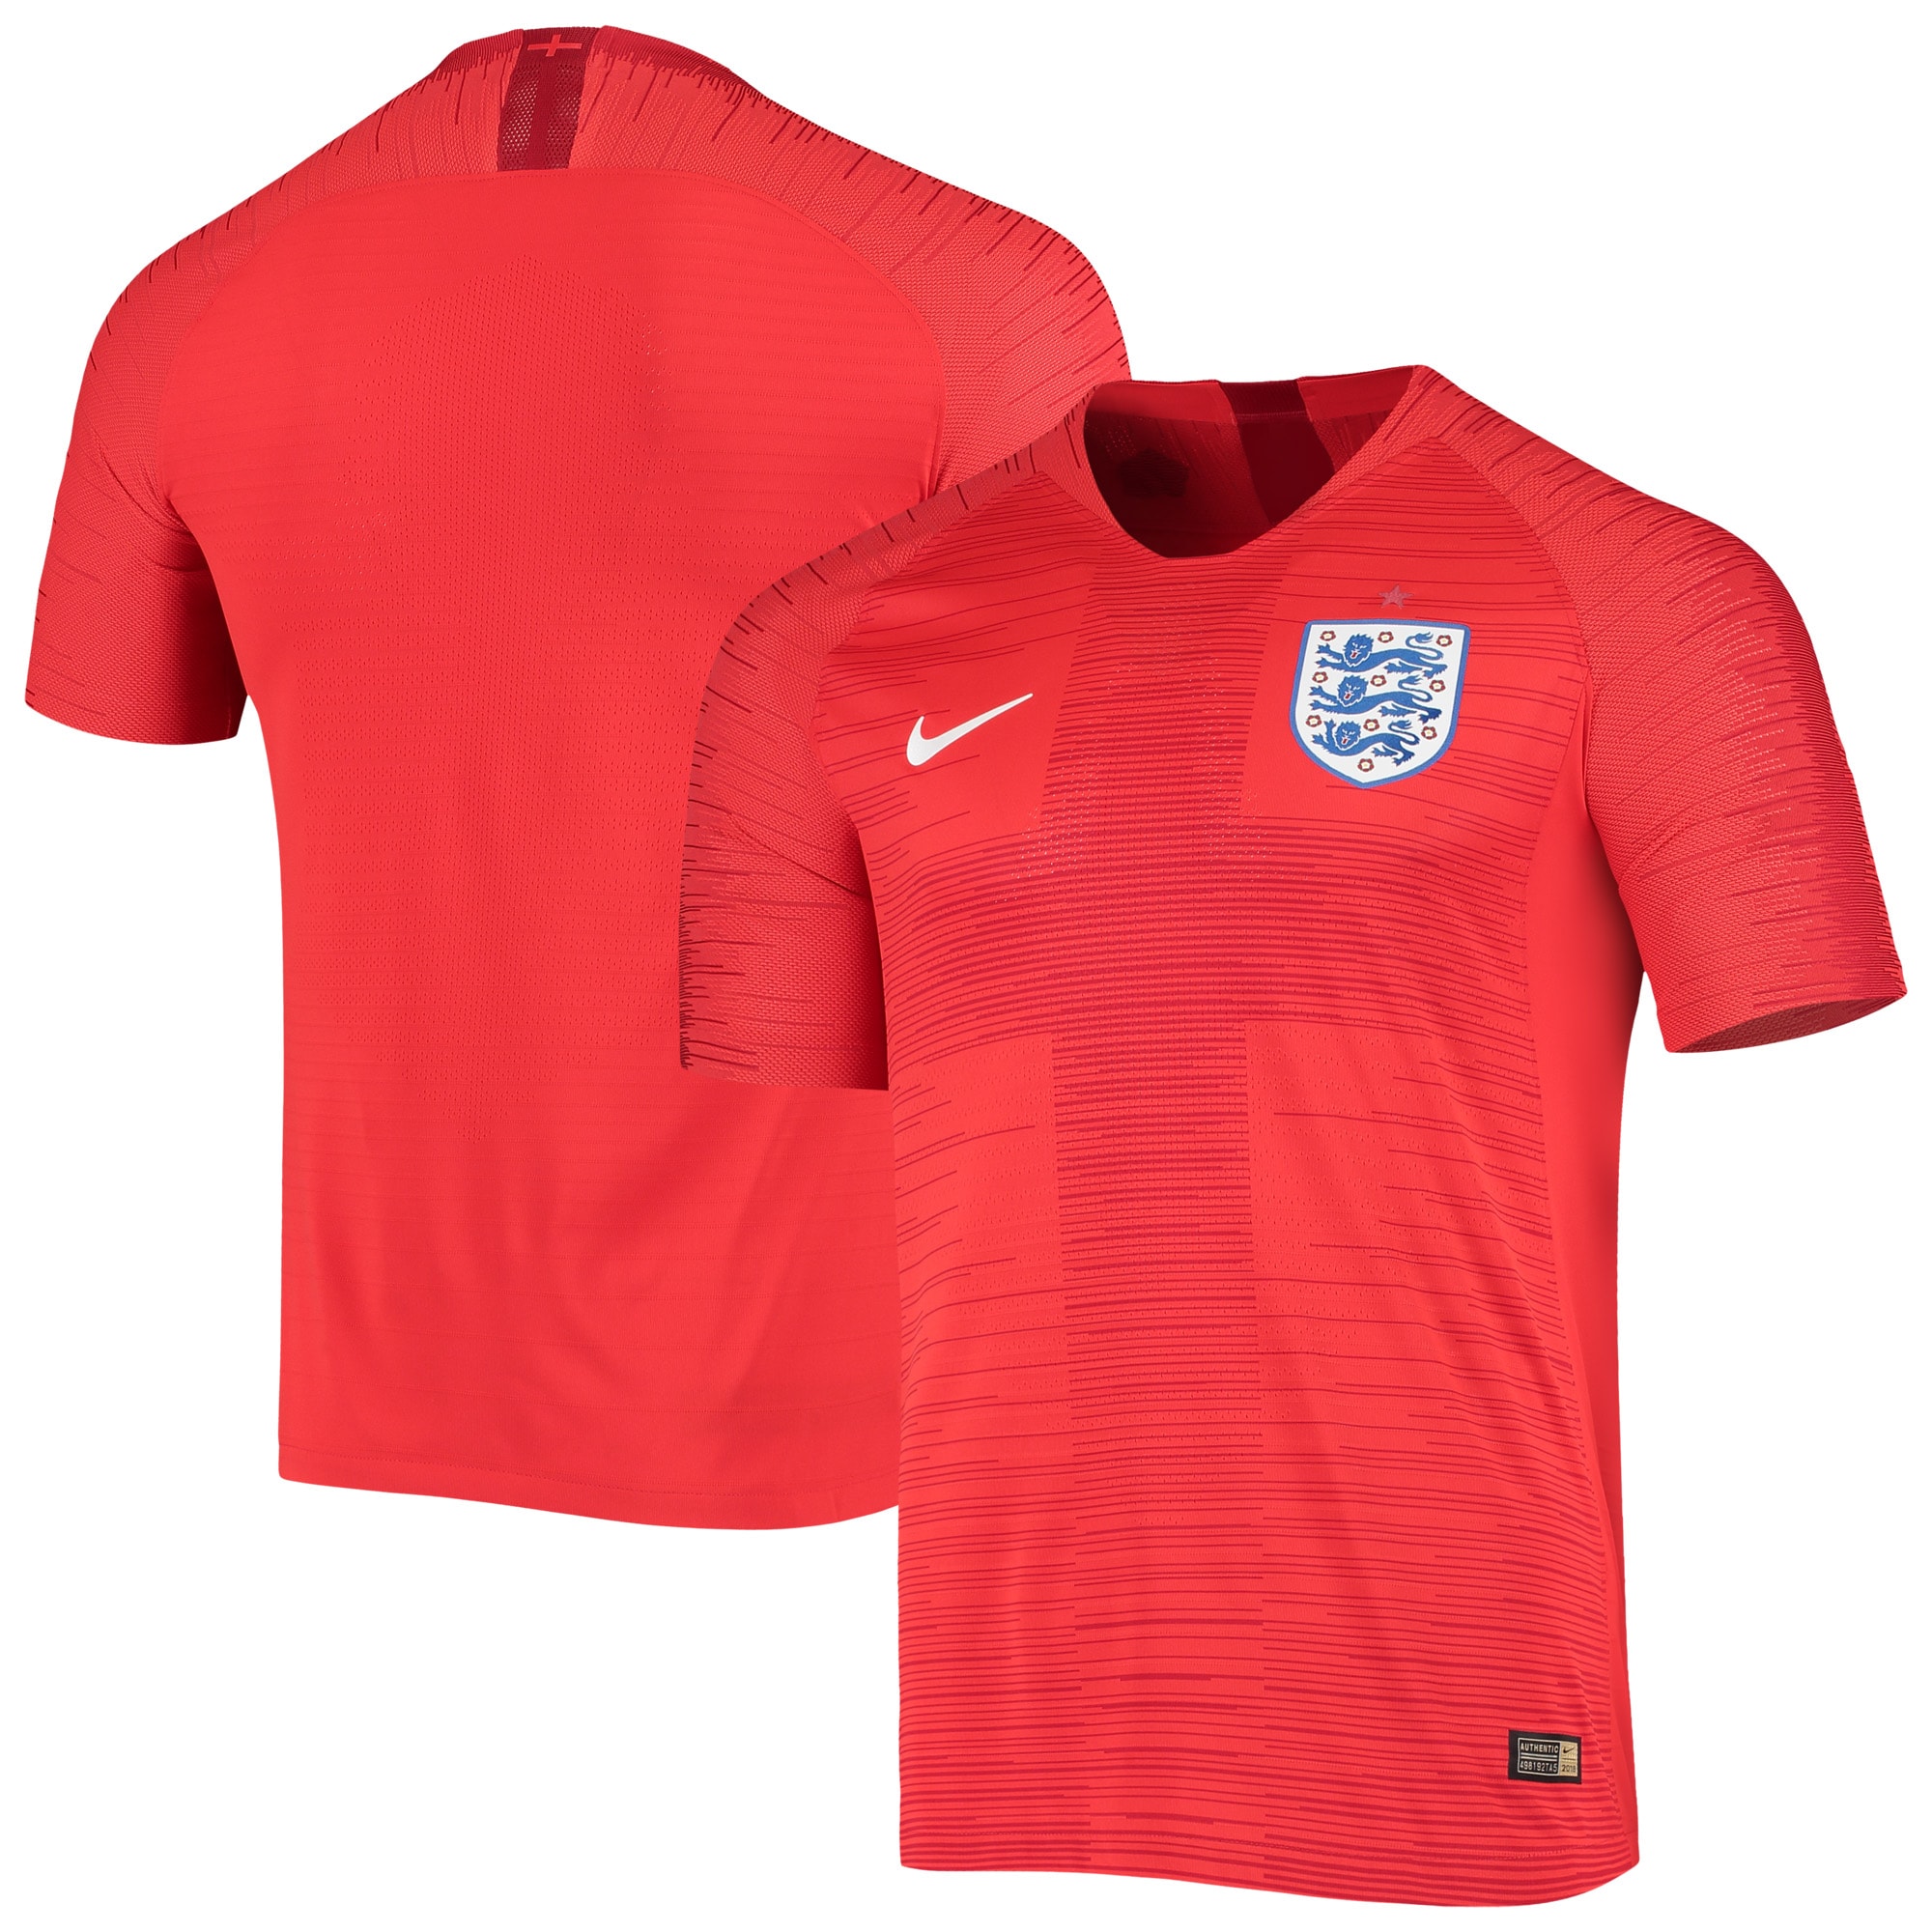 England National Team 2018 Authentic Away Jersey